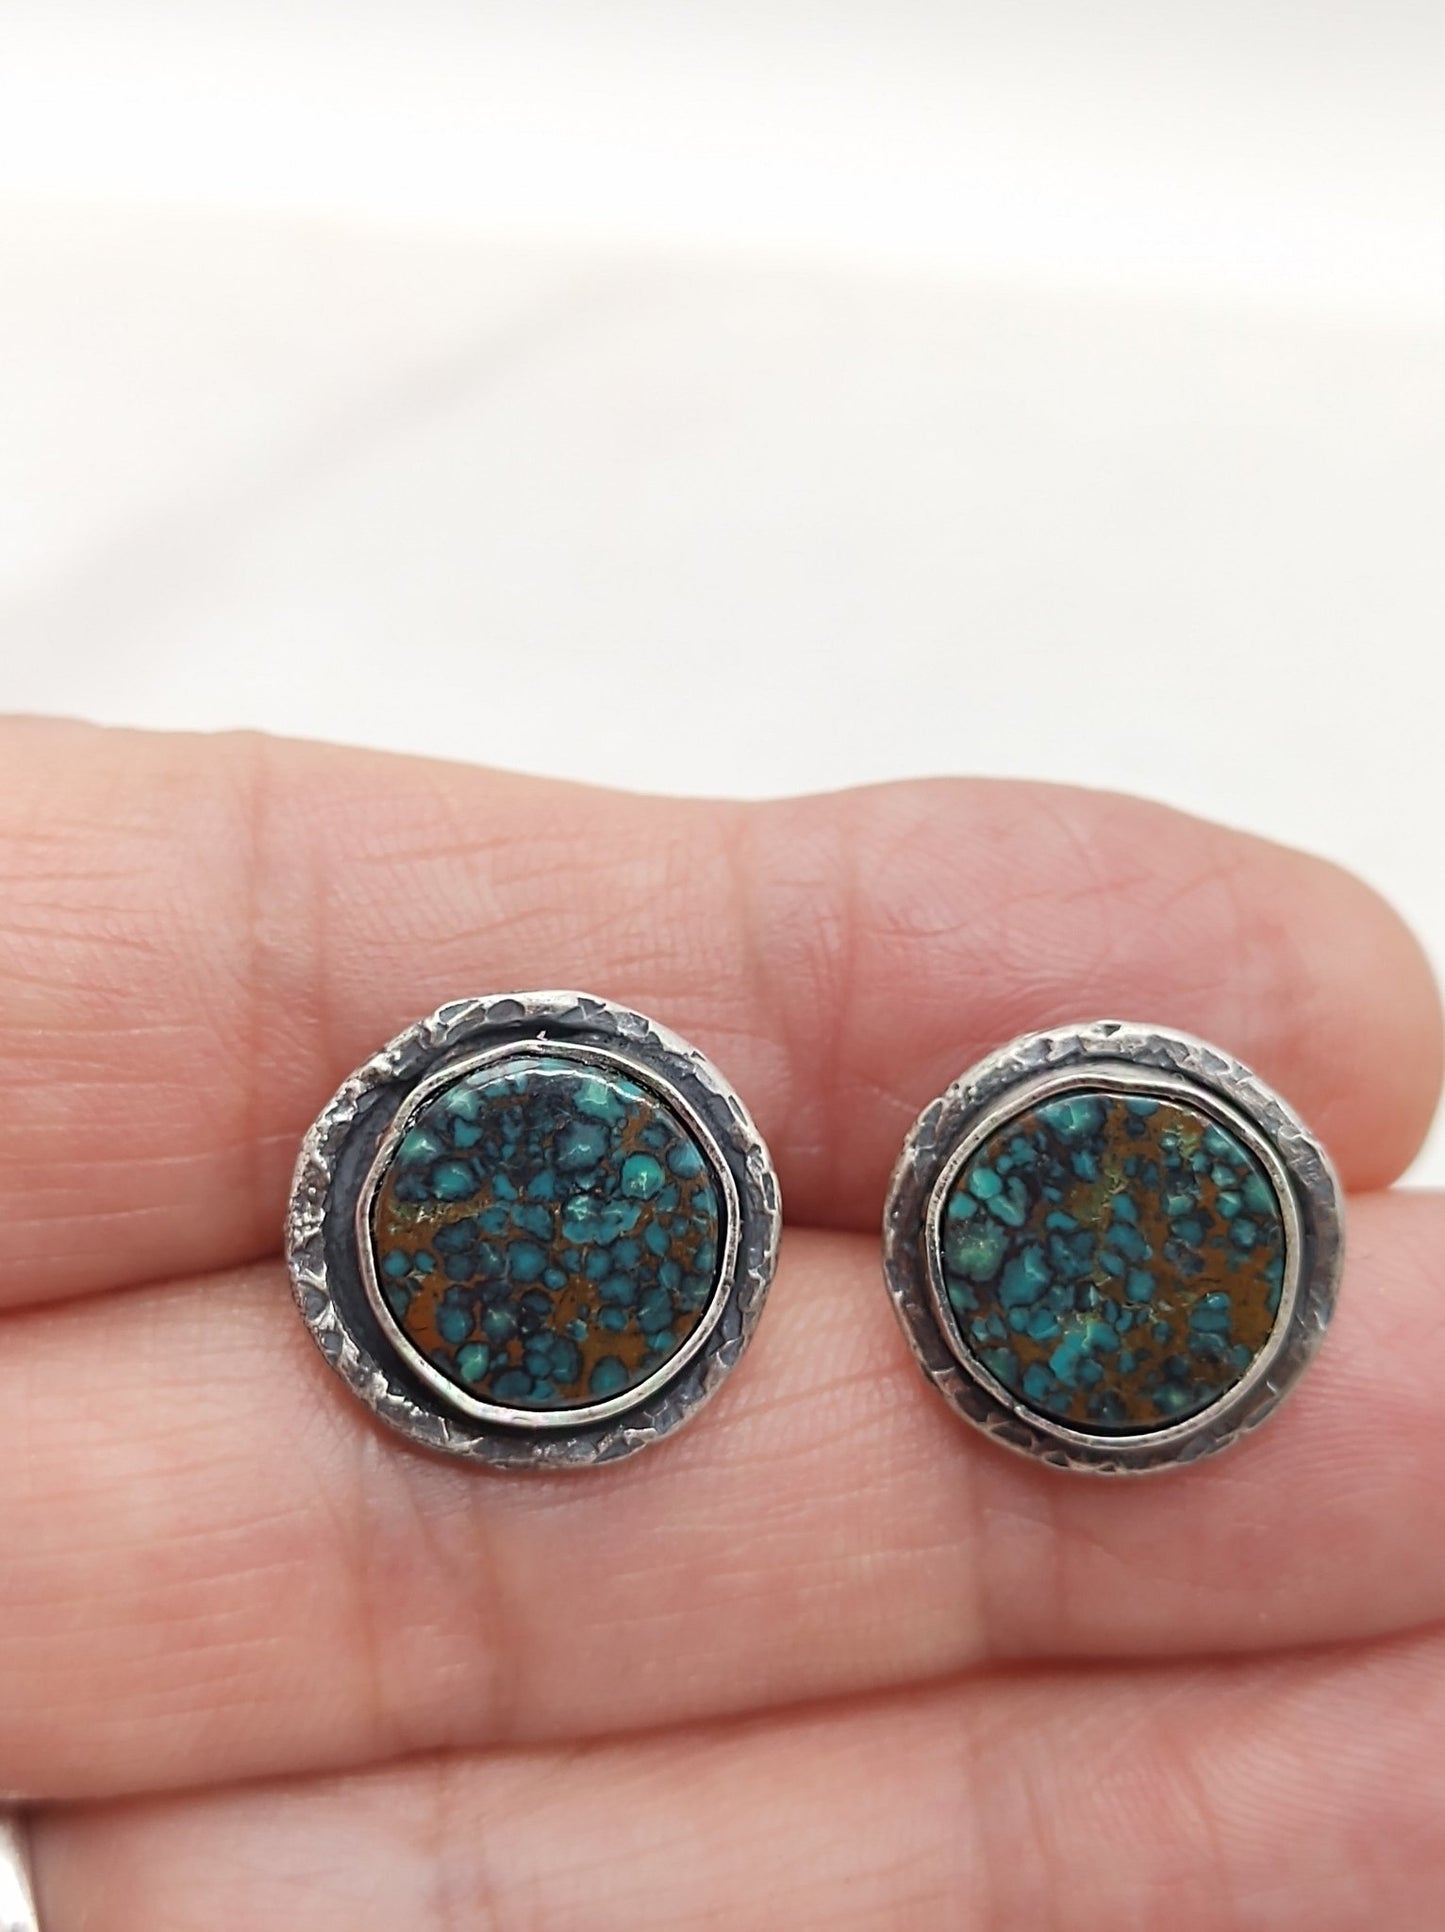 Turquoise Silver Stud Earrings with American Spiderweb Turquoise Earrings by Folks On The Edge - Folks On The Edge